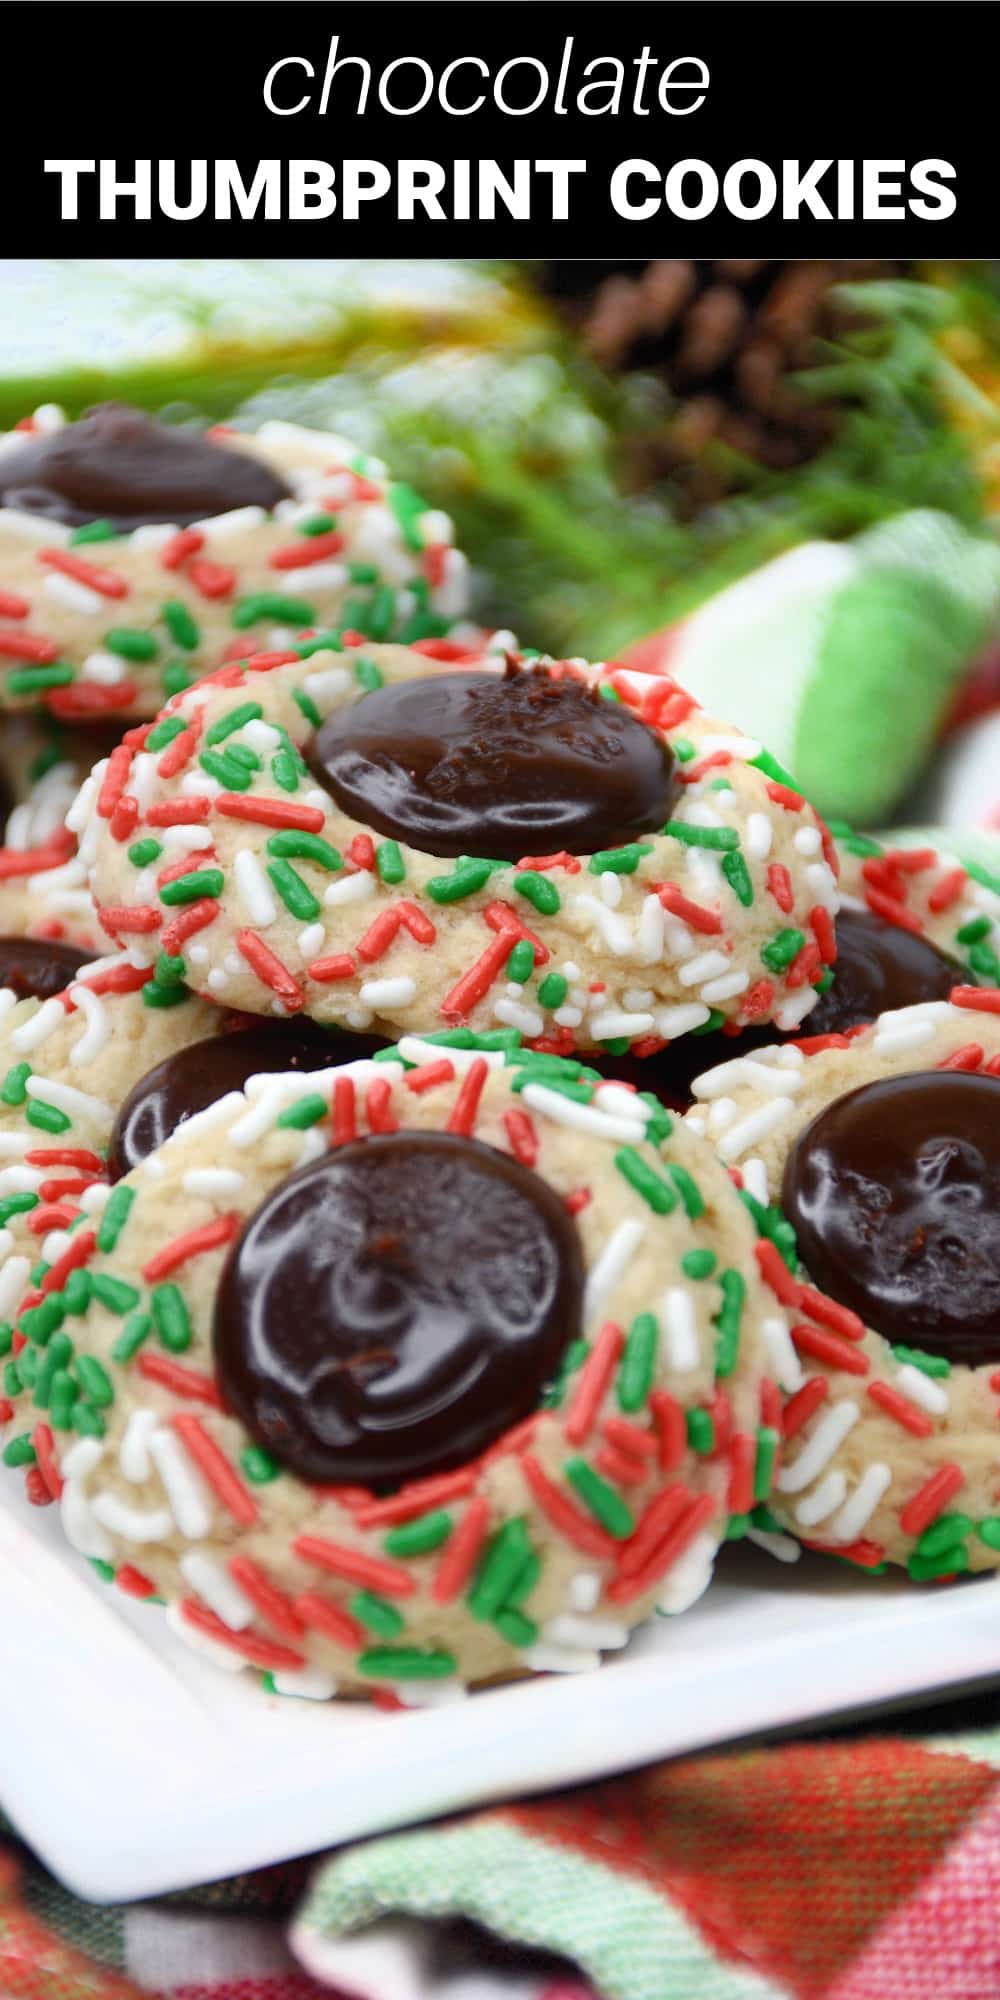 These chocolate thumbprint cookies are an irresistible treat that’s perfect for all your holiday parties. Sweet sugar cookies are covered with bright red and green sprinkles and topped with a rich and creamy chocolate ganache. It’s a fun and festive cookie that’s both beautiful and incredibly delicious.